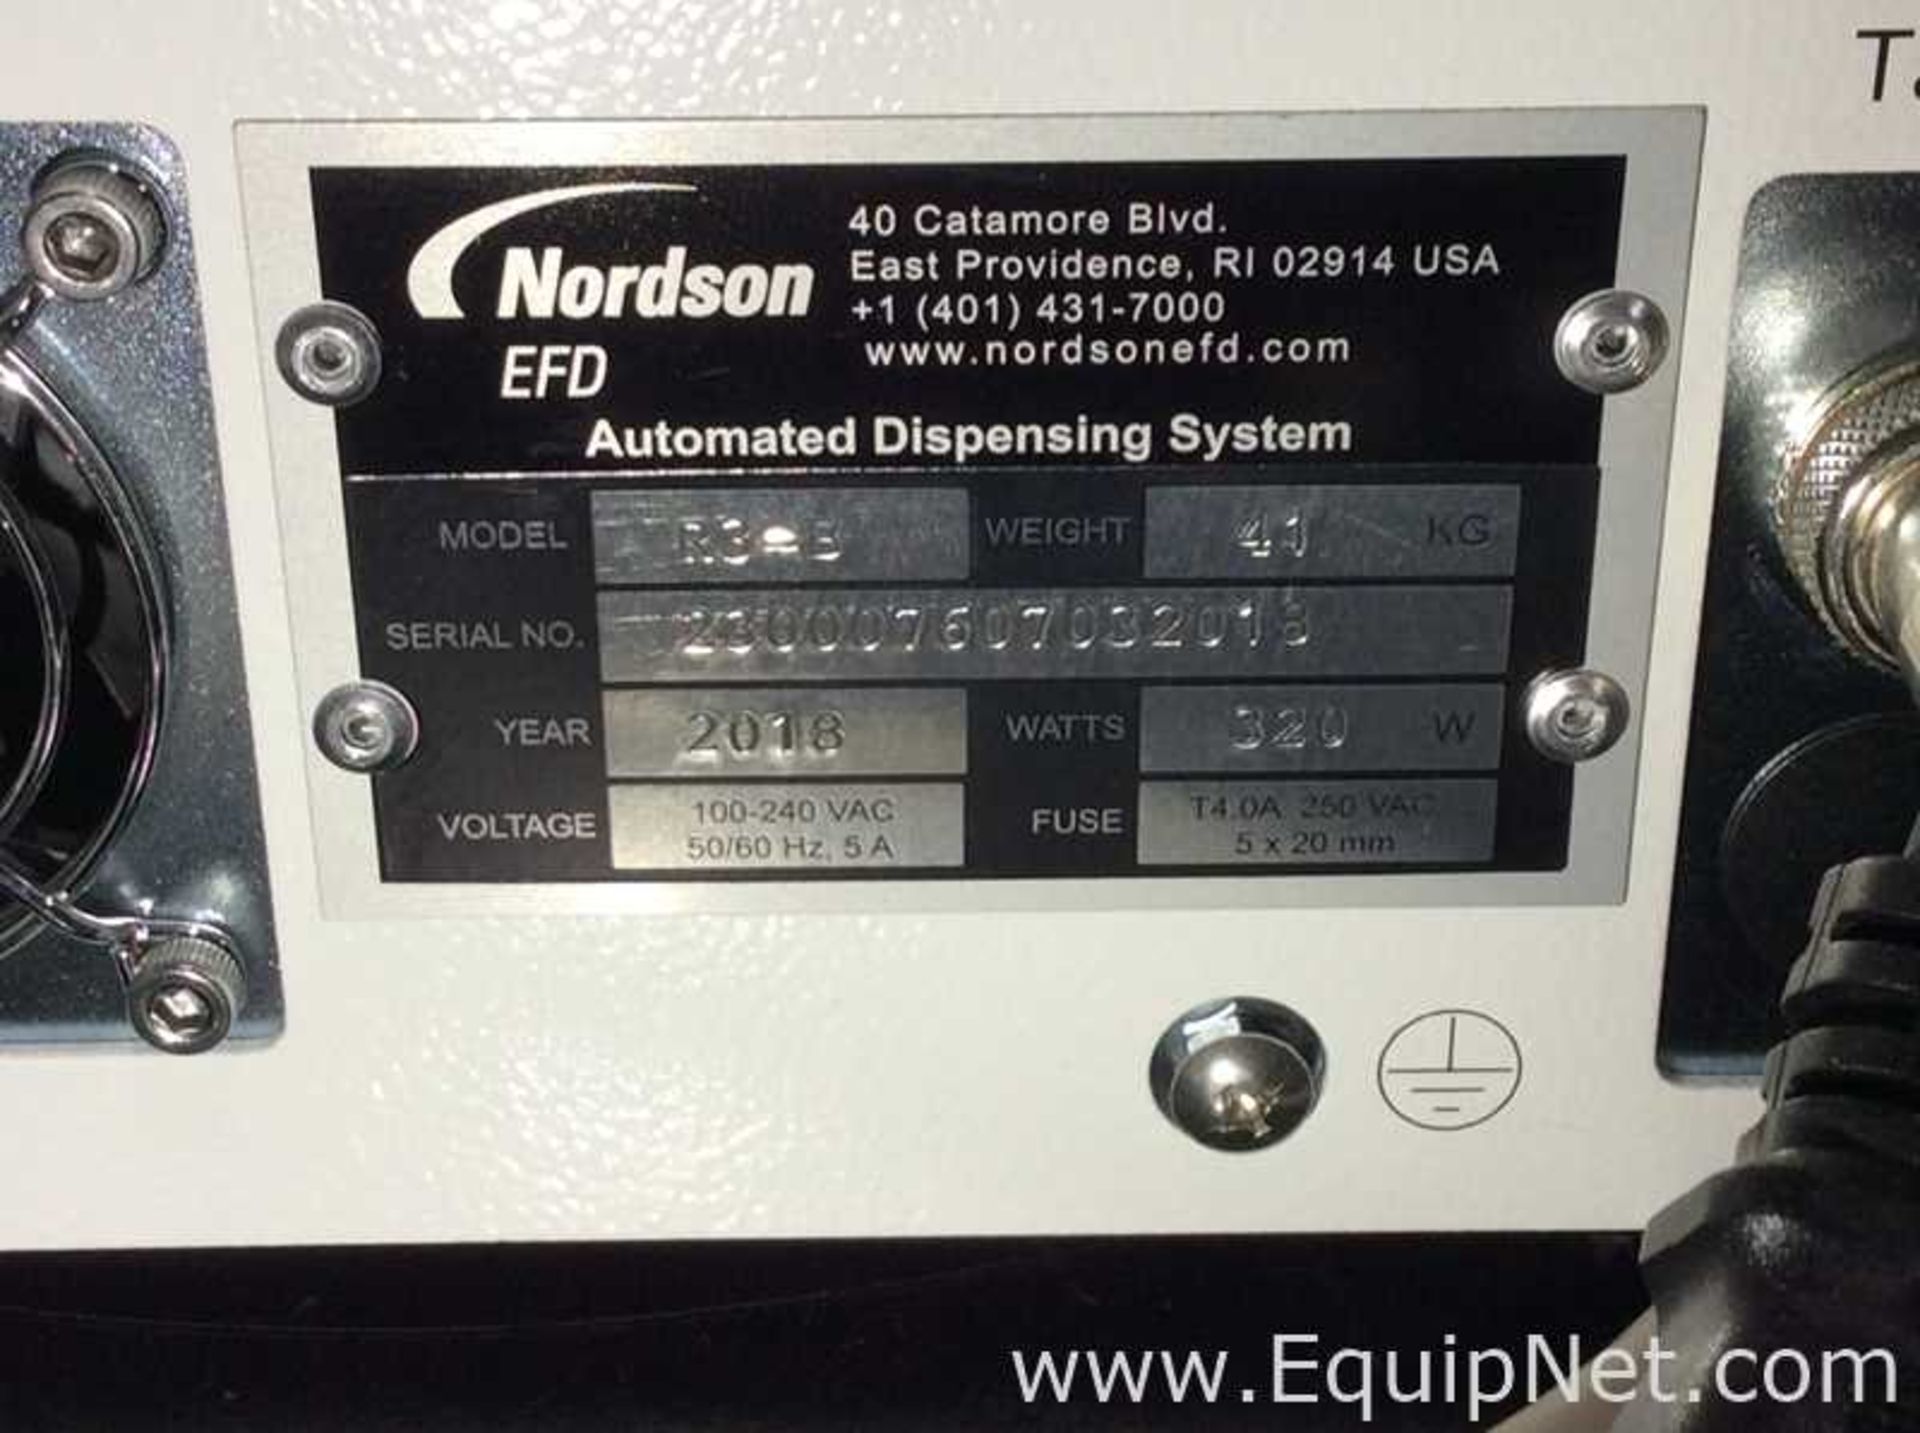 Nordson R3 Automated Fluid Dispensing Robot - Image 4 of 4